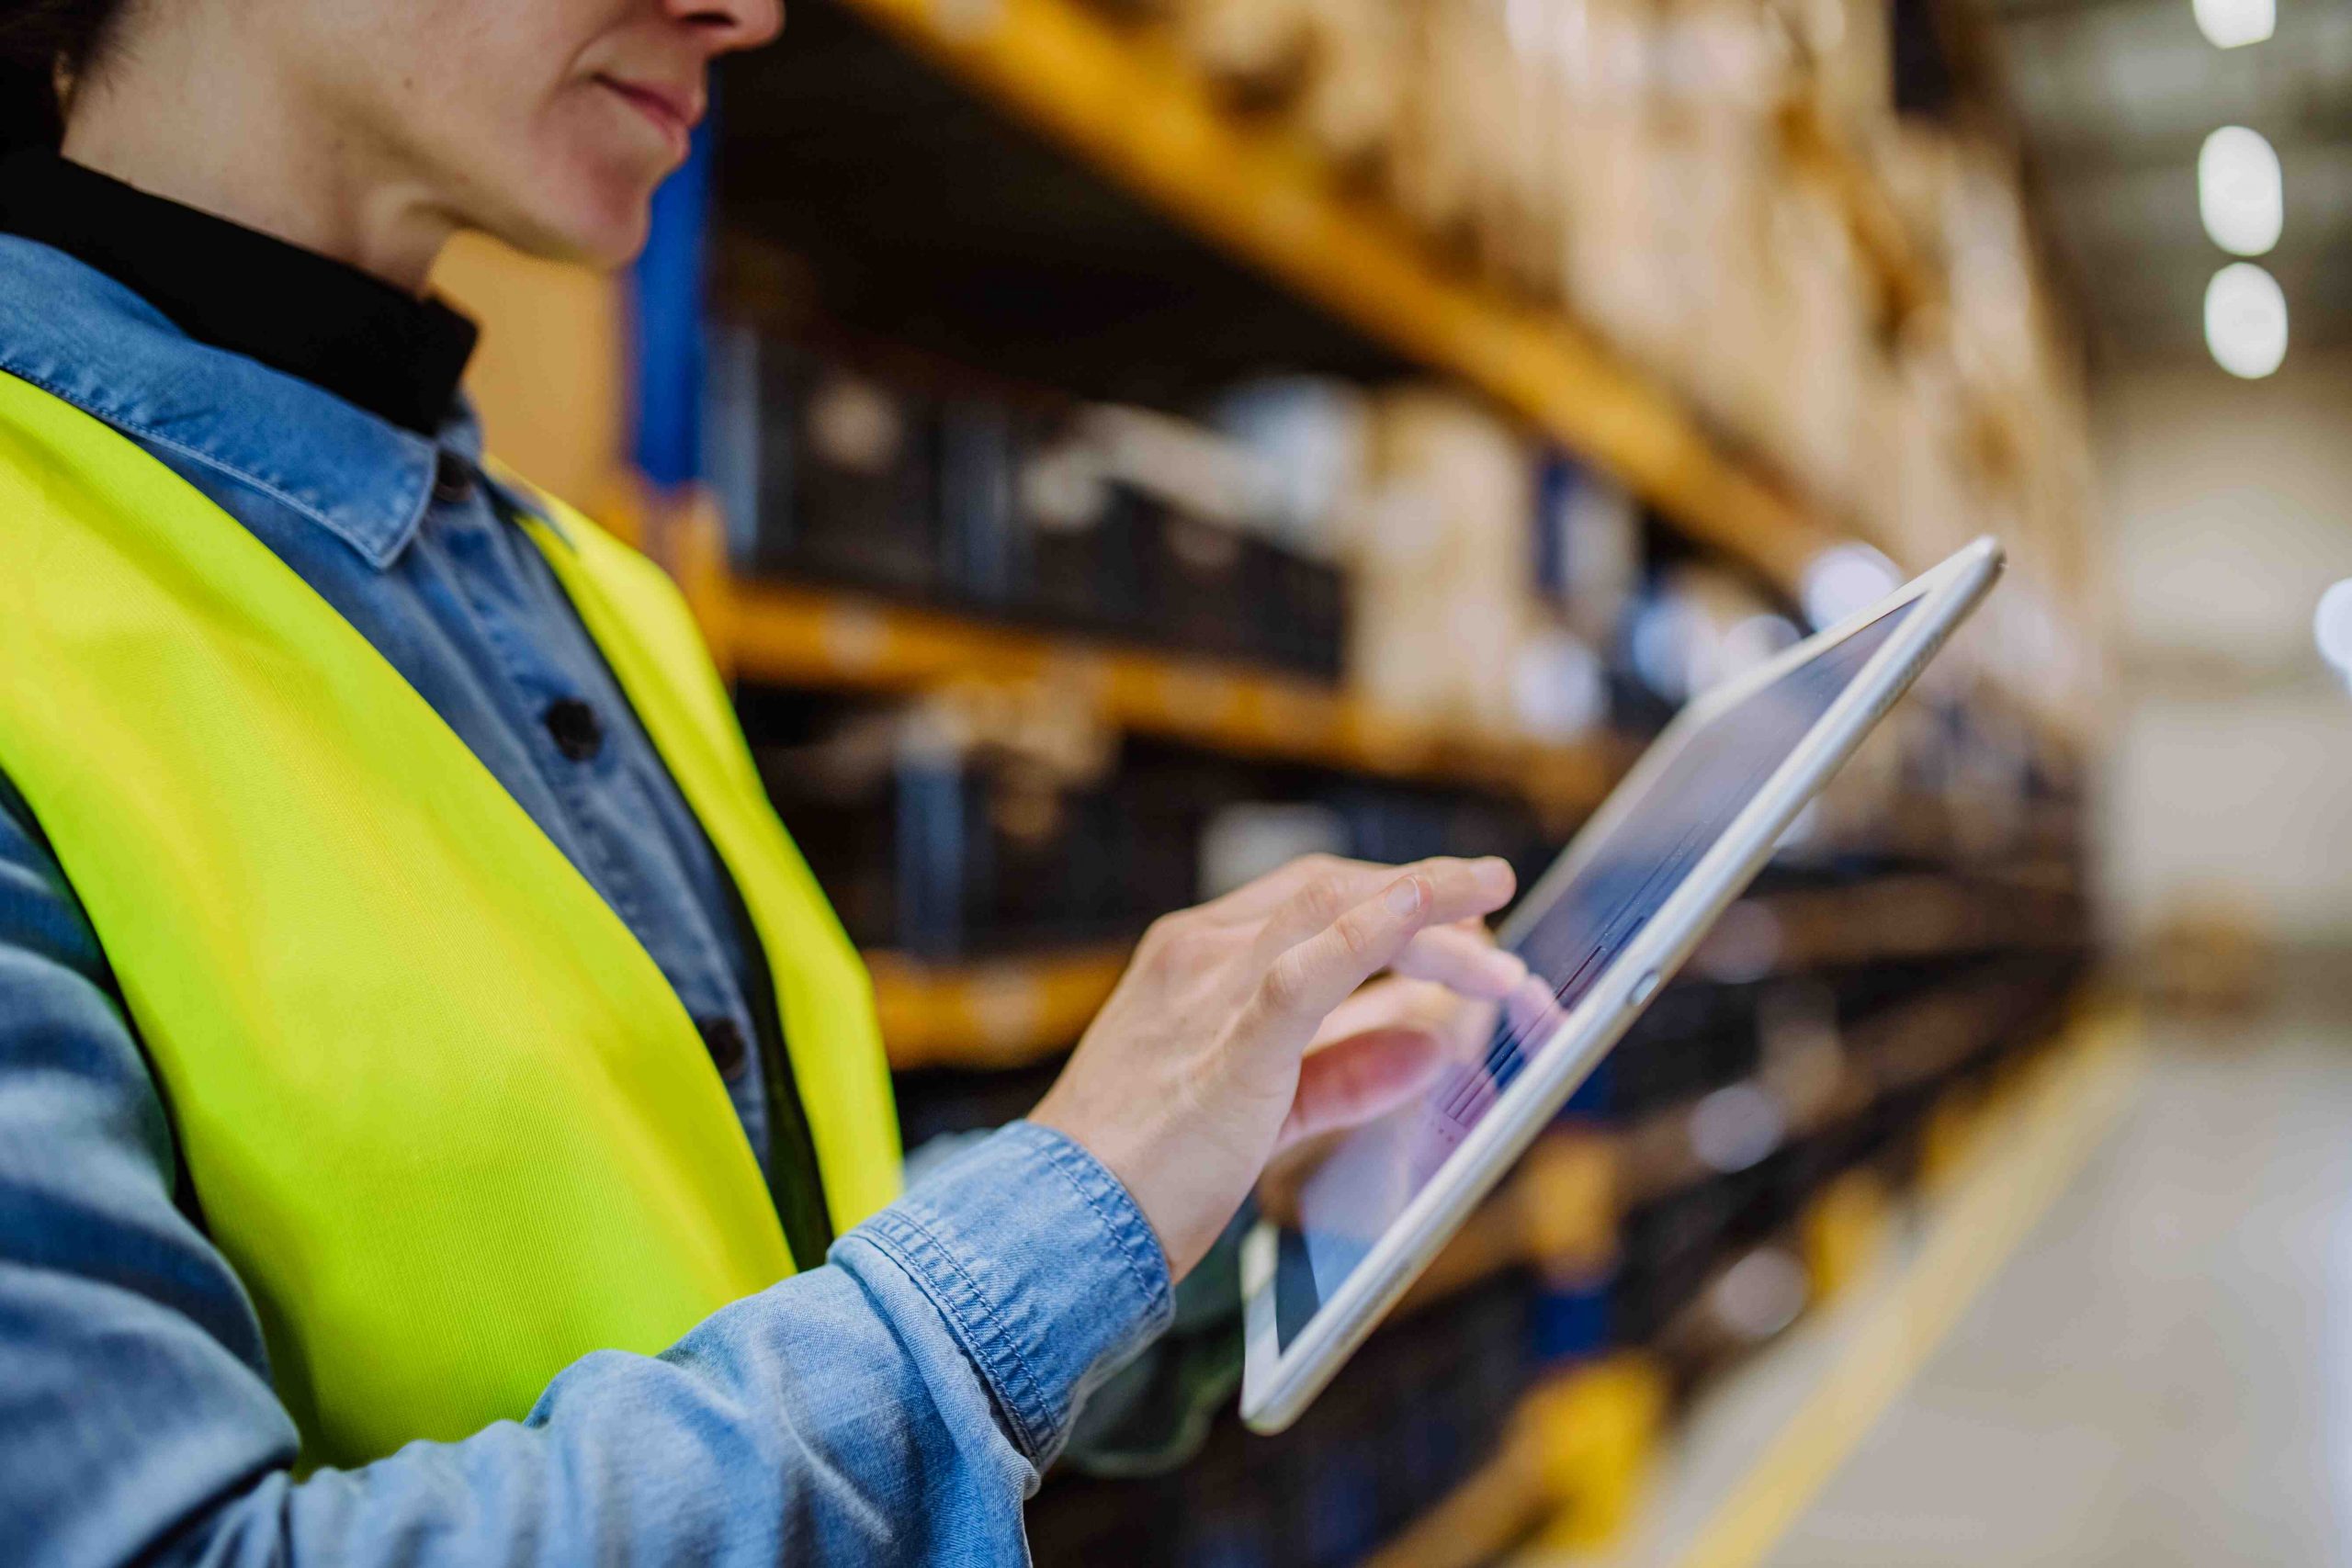 A female warehouse worker uses a WMS mobile solution on a tablet to manage inventory.